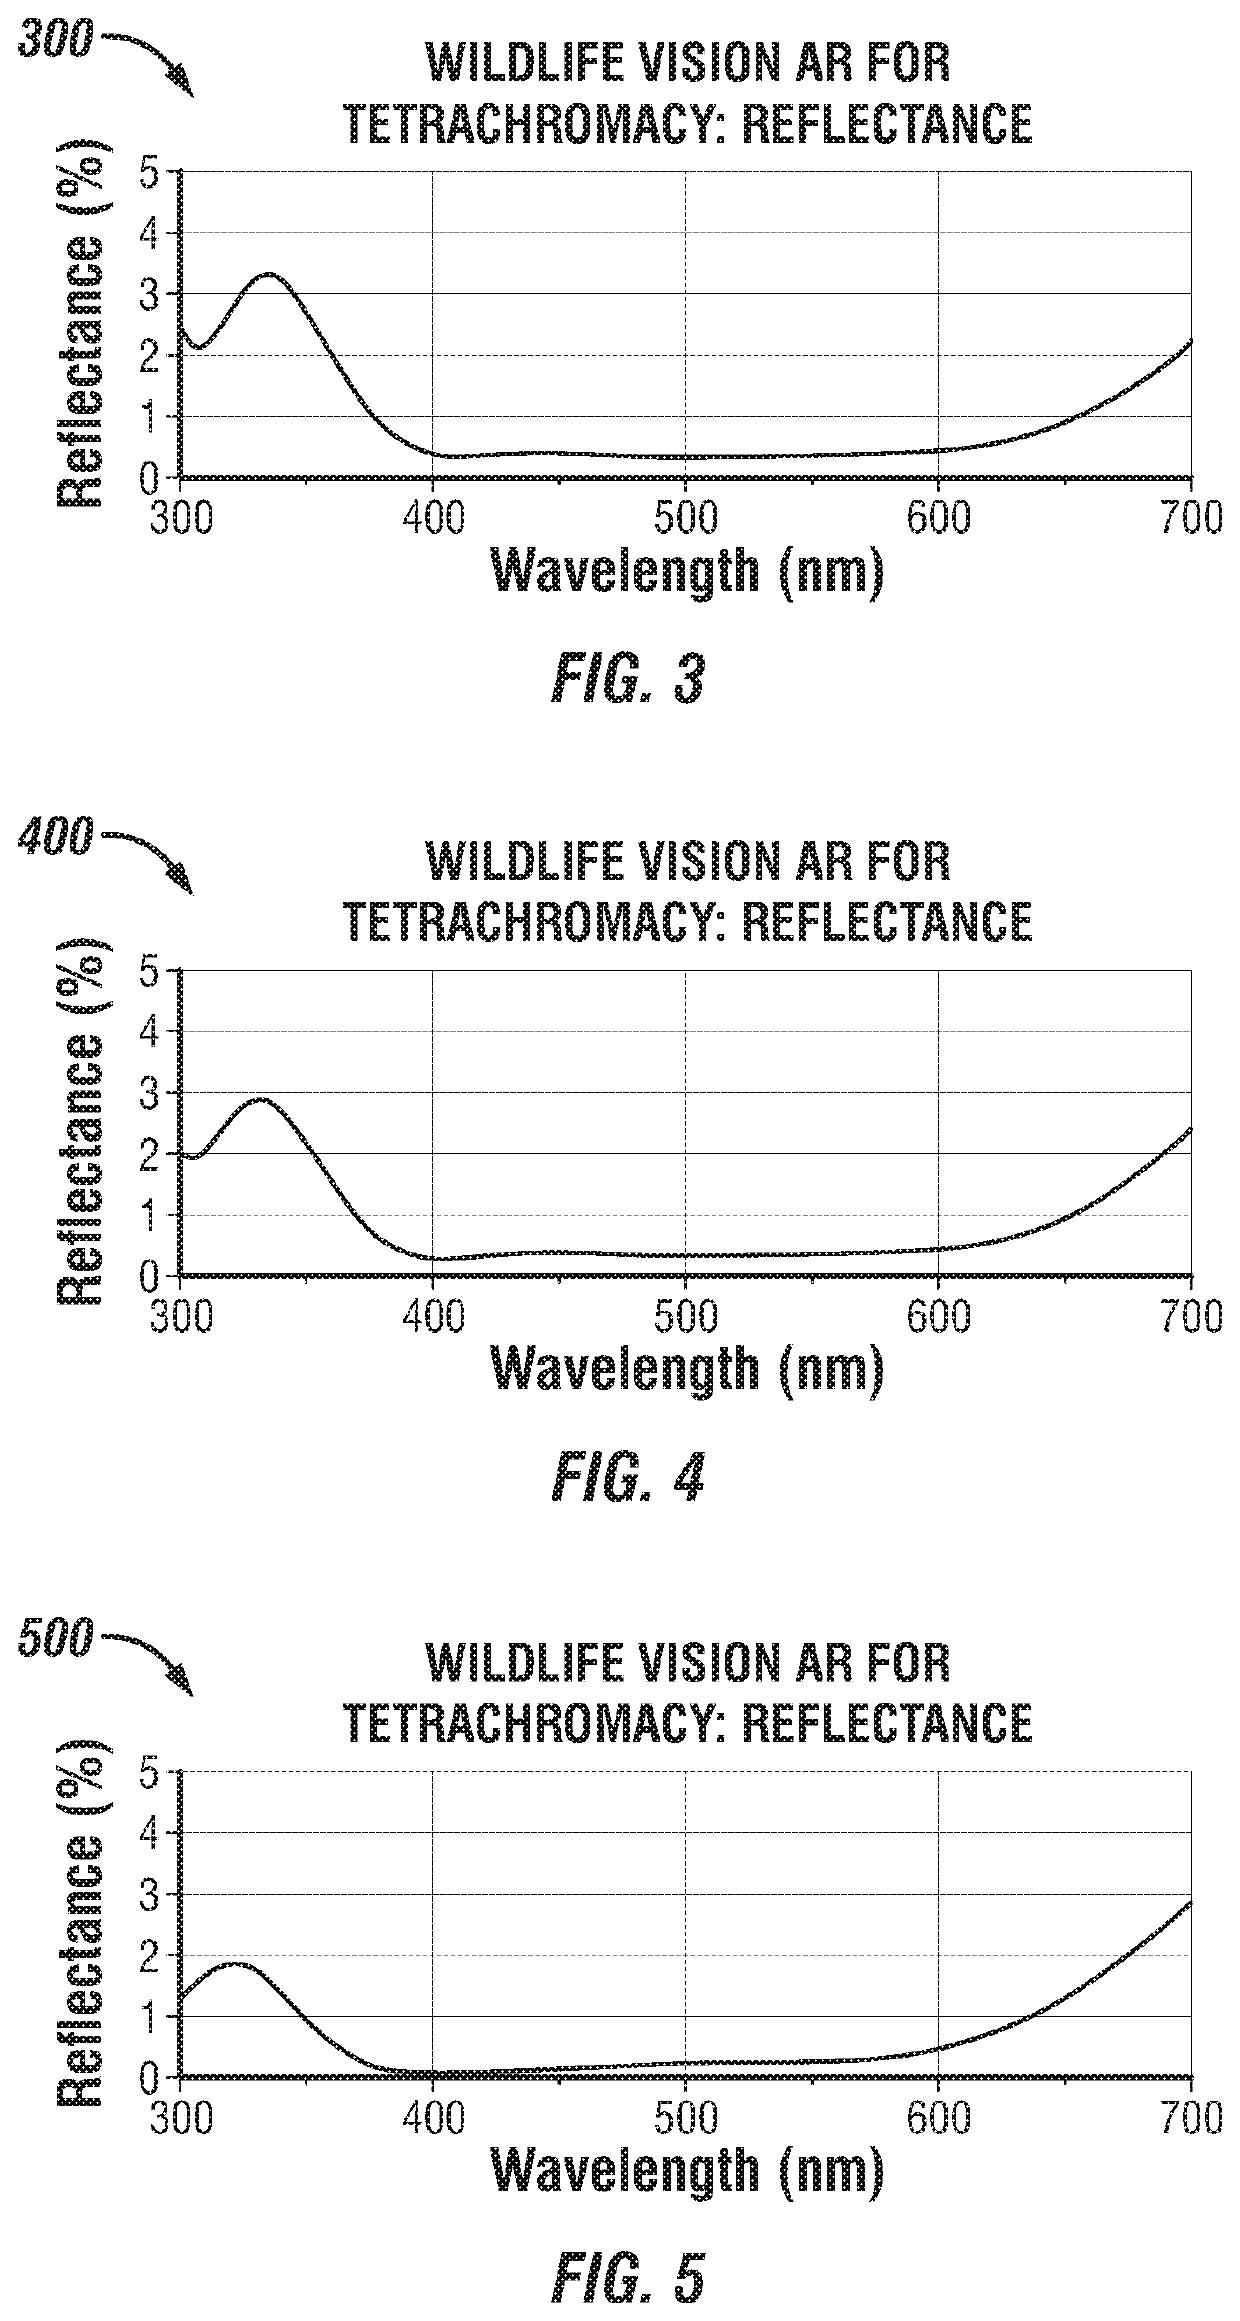 Method for treating a lens to reduce light reflections for animals and devices that view through the ultra violet light spectrum